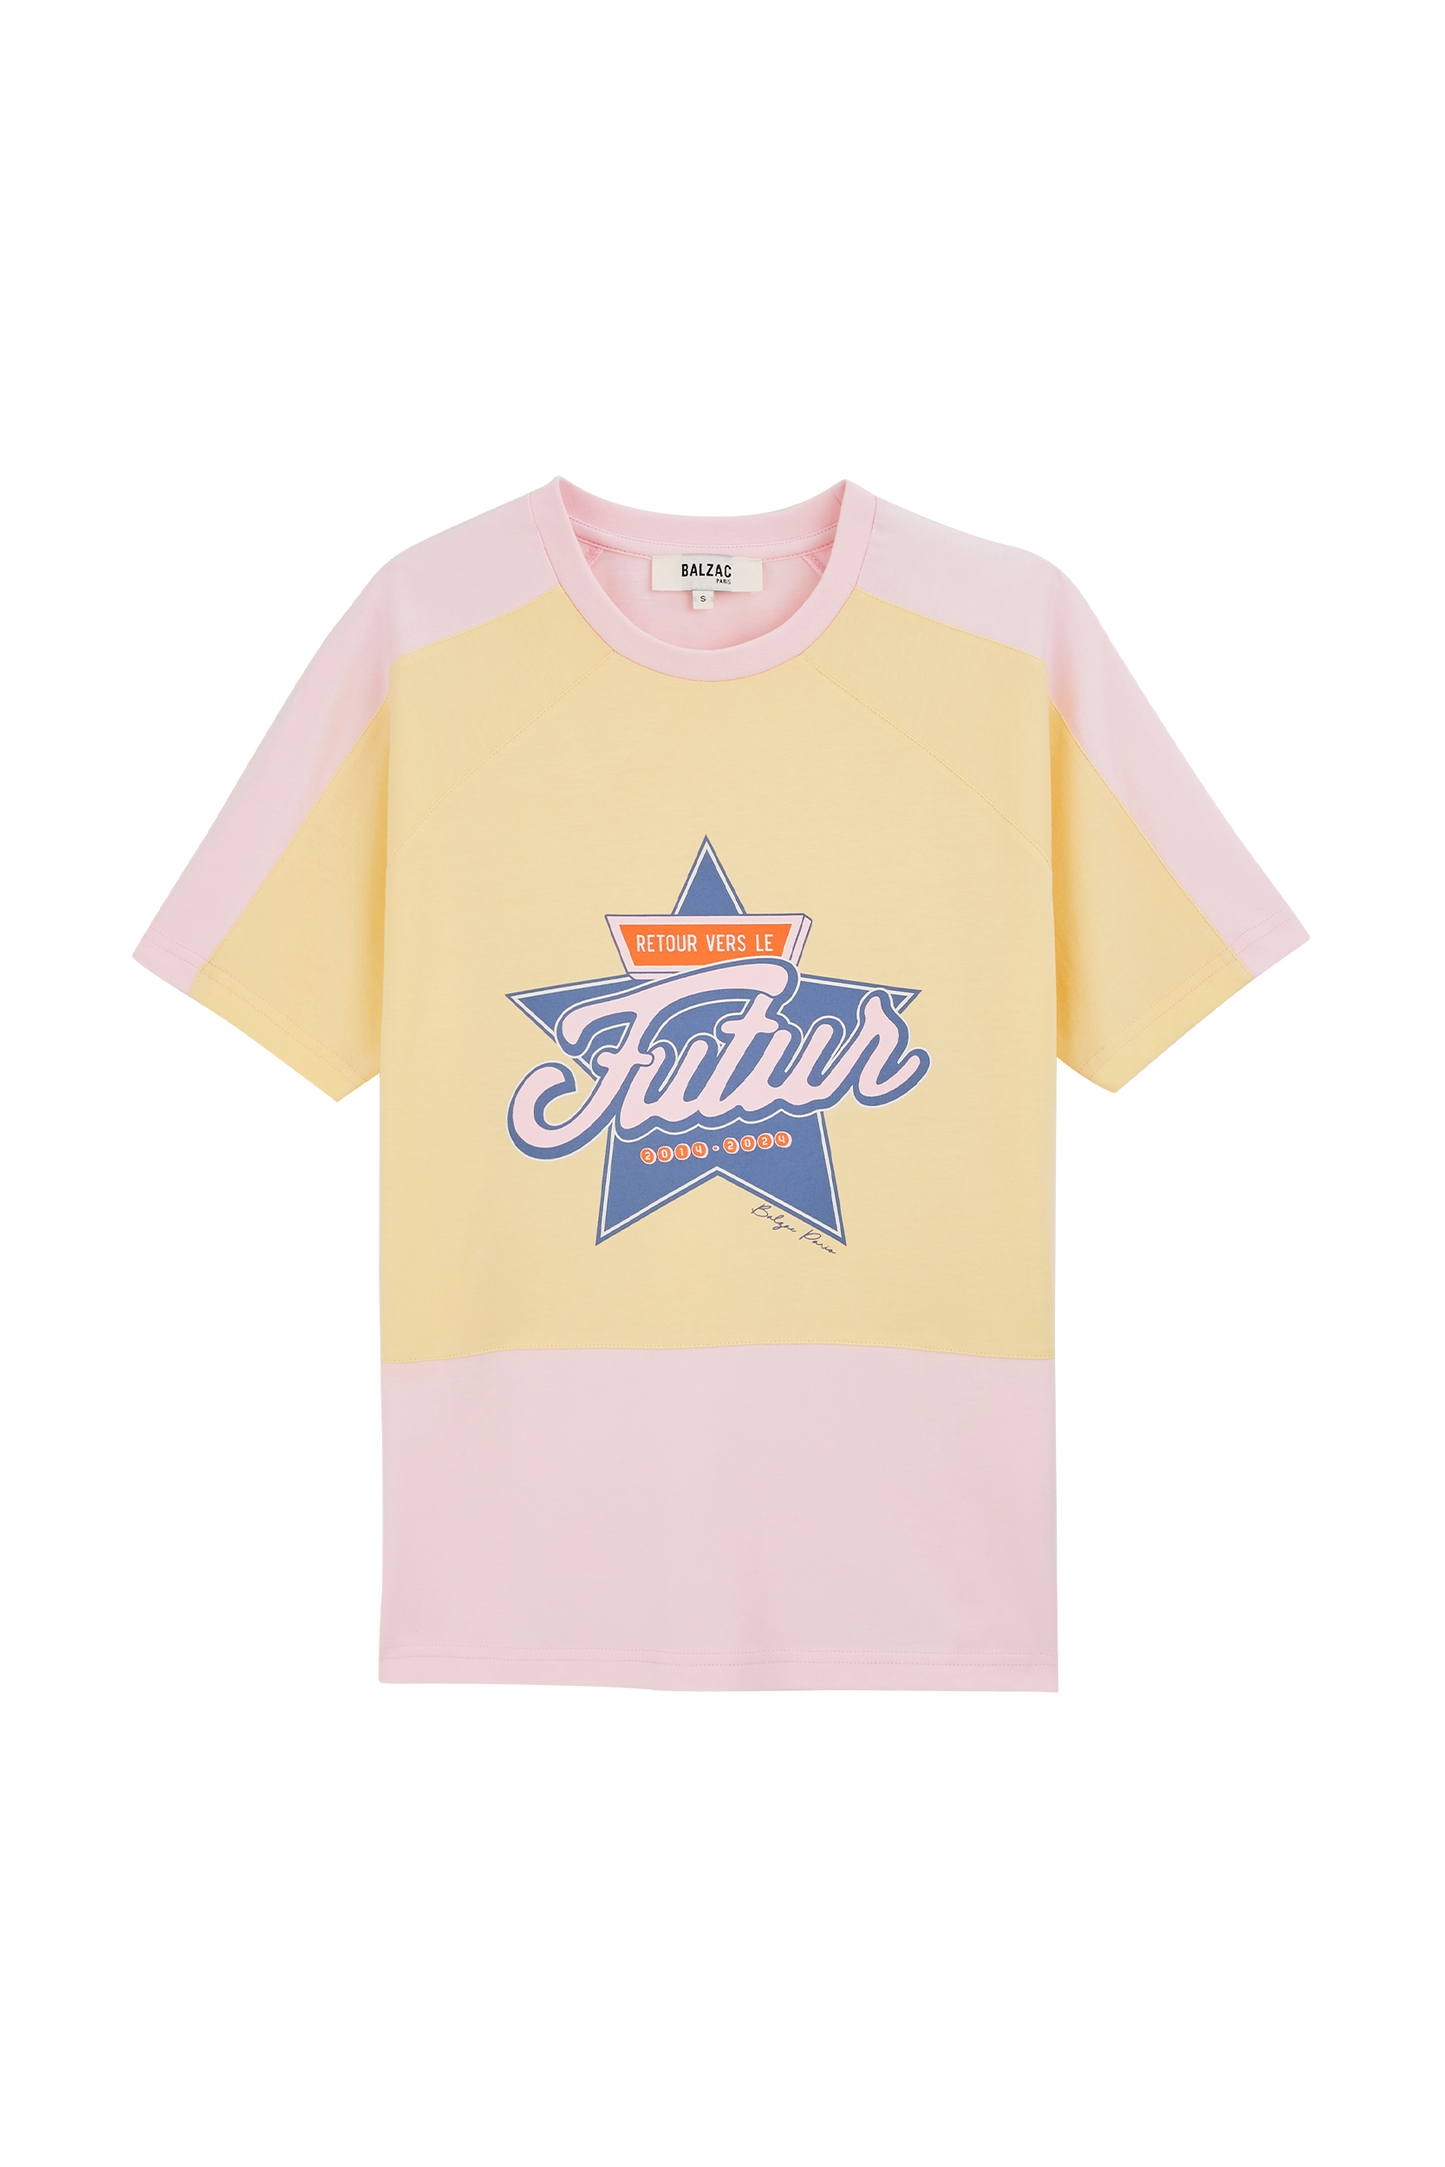 Boby Back to the Future pink and yellow t-shirt